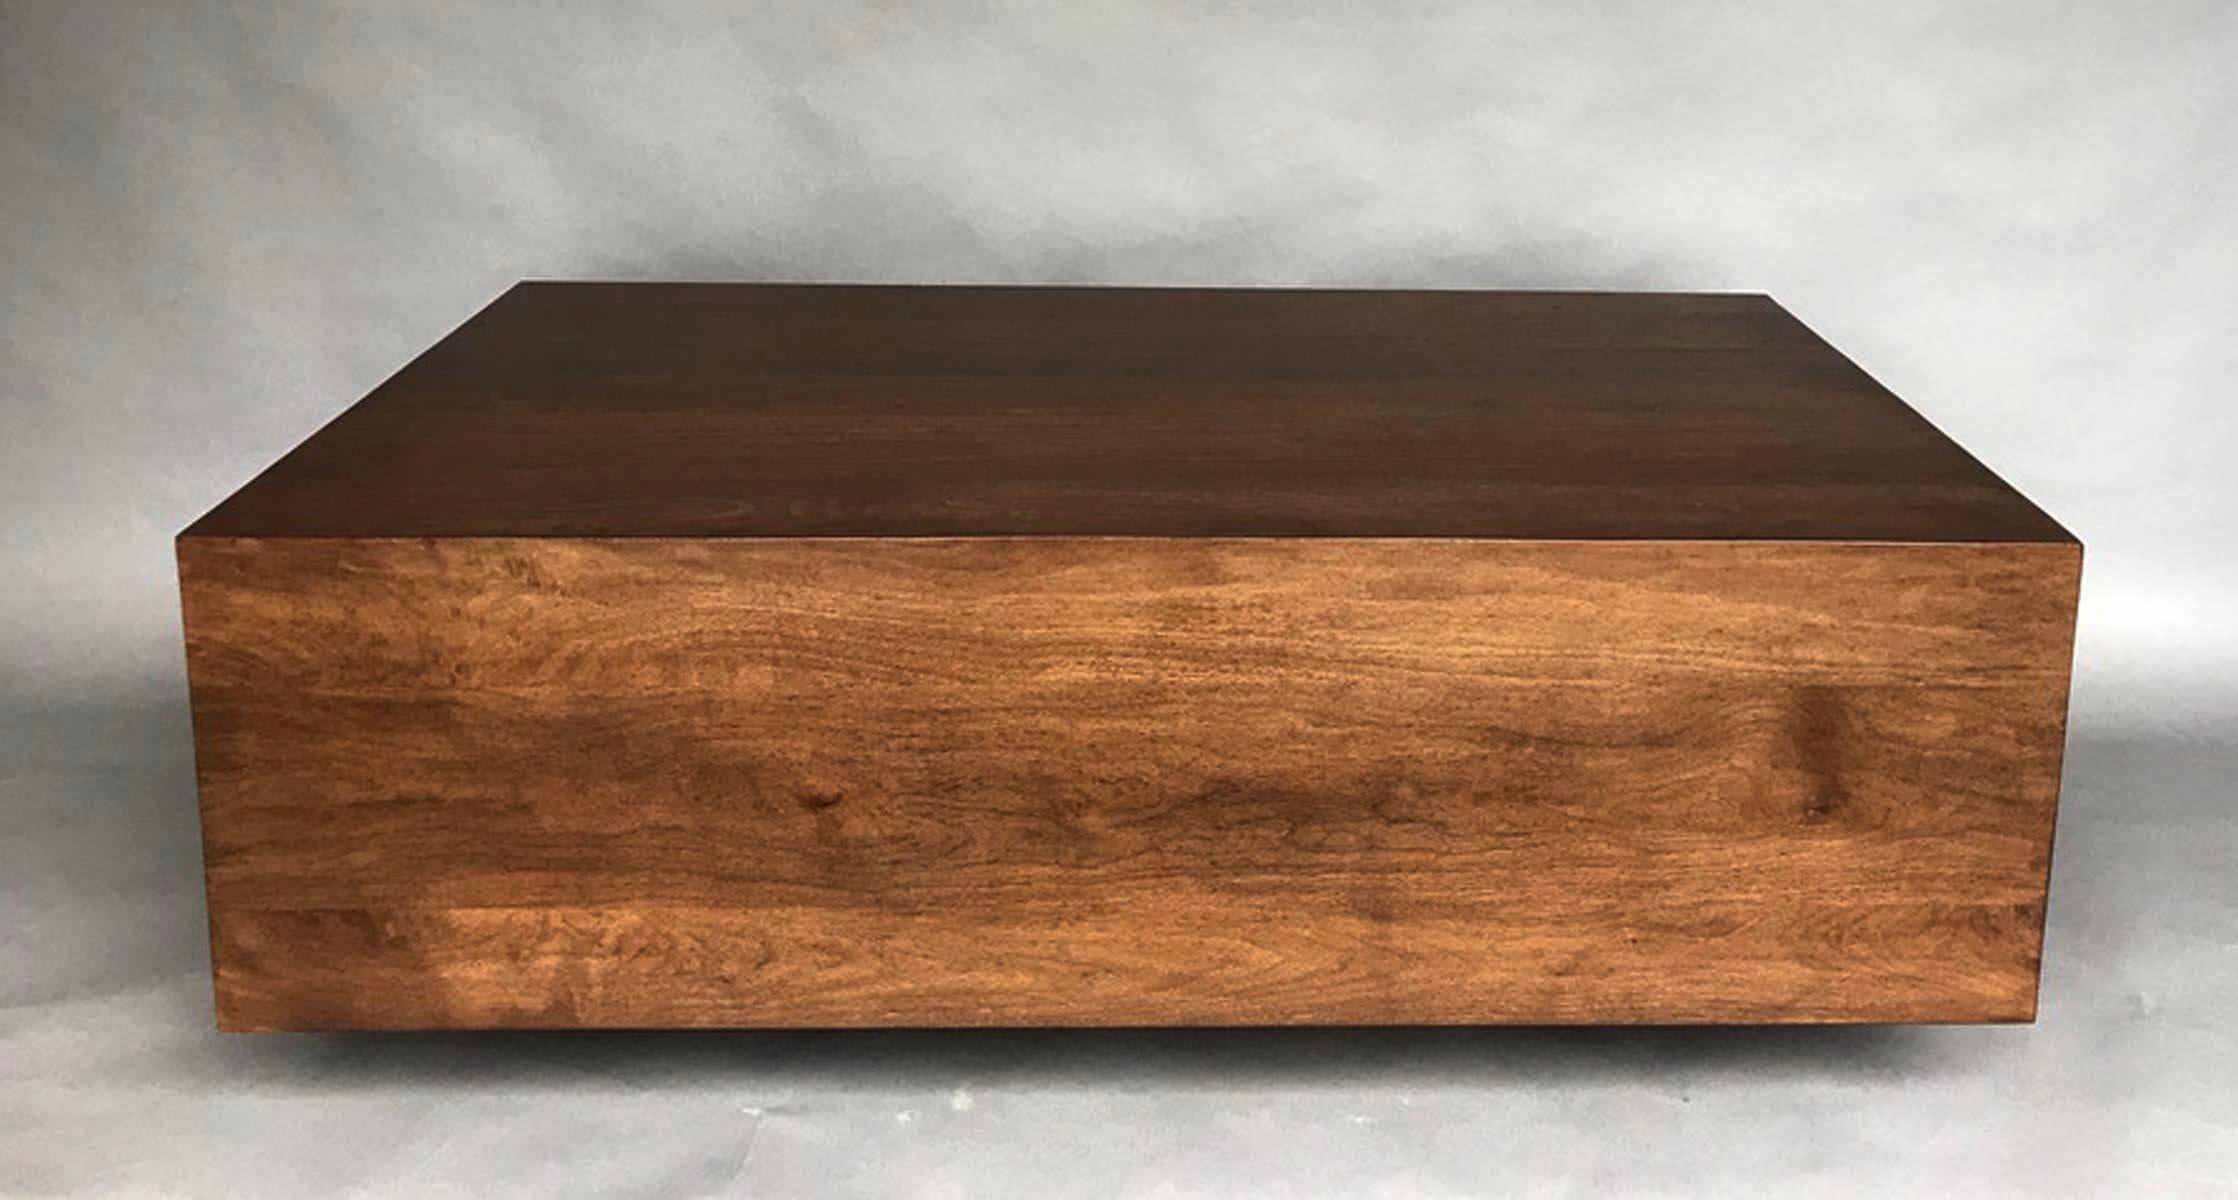 Custom walnut coffee table with a walnut #2 finish and light distress. Can be made in any size and in a range of finishes. Lead time is 12 weeks.
Made in Los Angeles by Dos Gallos Studio
As shown 60 x 36 x 17 inches tall.
CUSTOM PRICES ARE SUBJECT